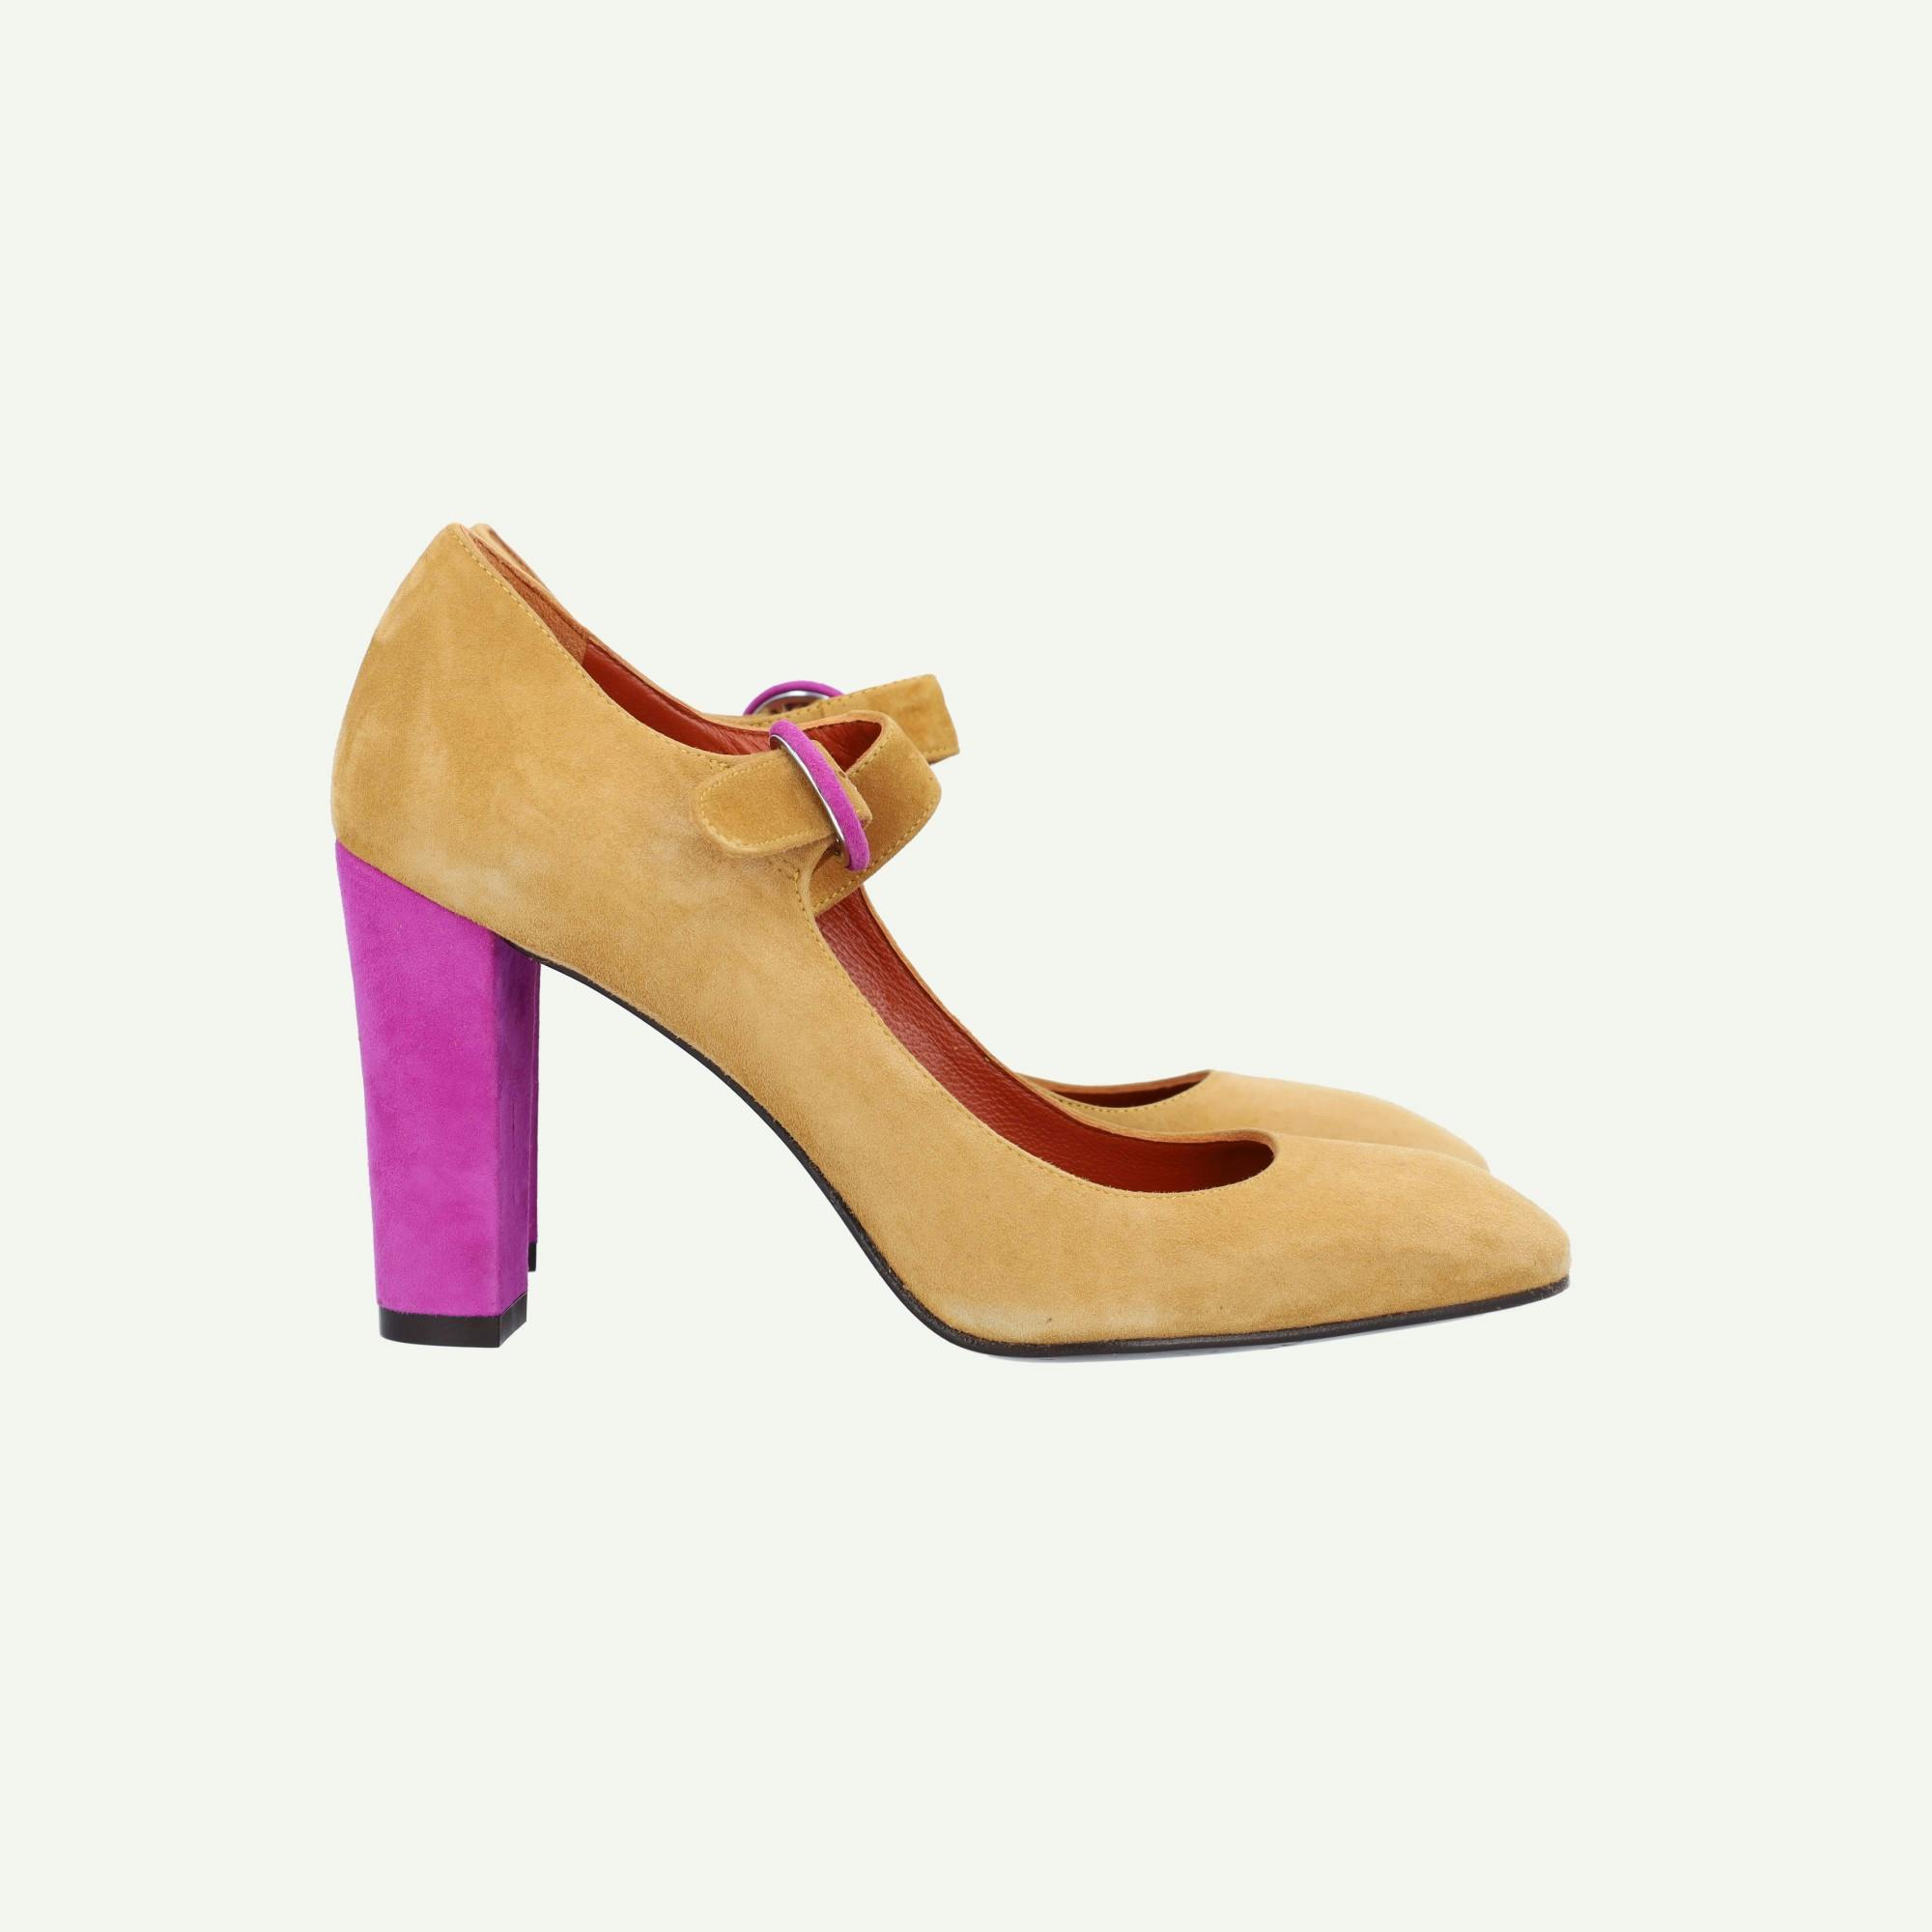 Penelope Chilvers Shoes image 1